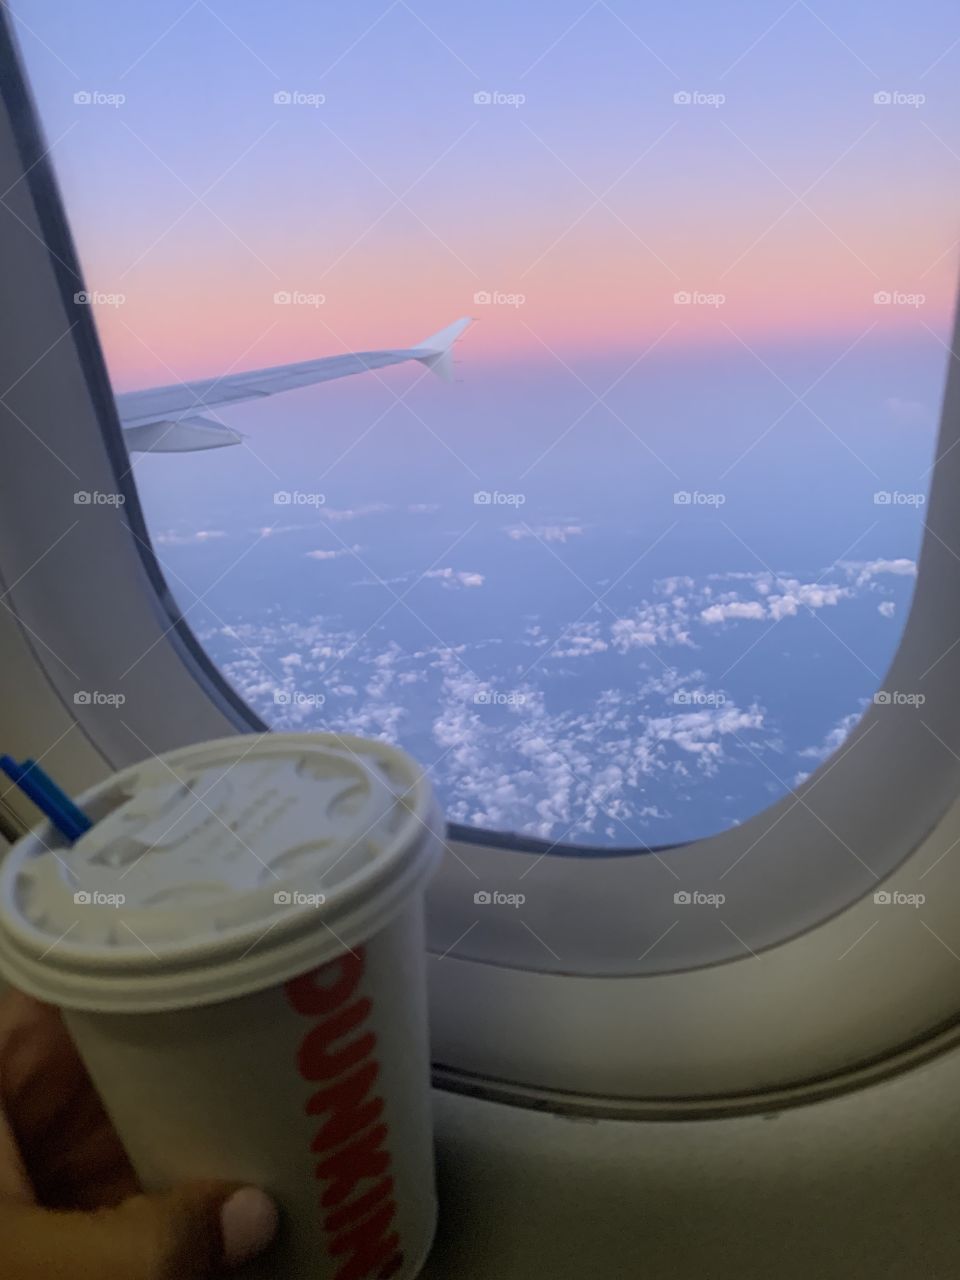 Captured the greatest view in the sky I could’ve have ever gotten while flying to see my best friend this summer! Dreamlike, with the best morning drink.